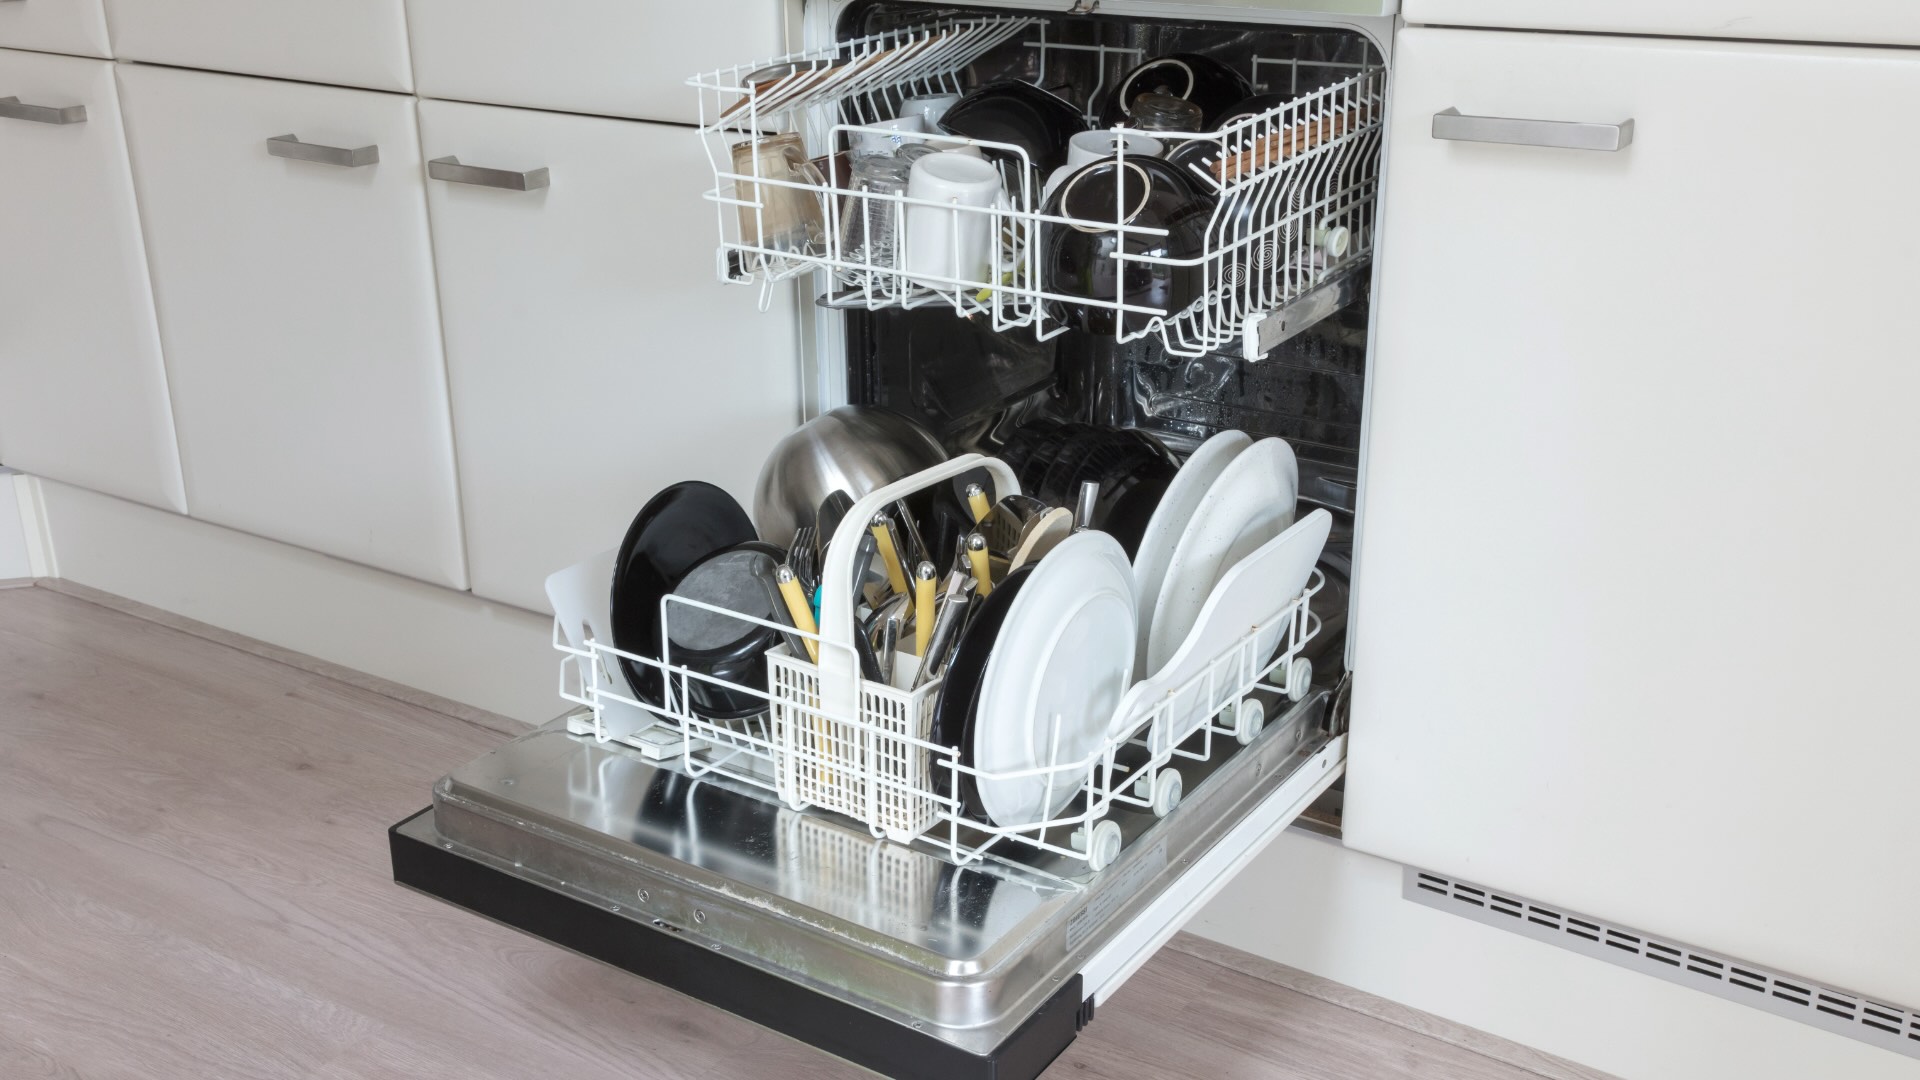 How To Fix The Error Code C11 For GE Dishwasher